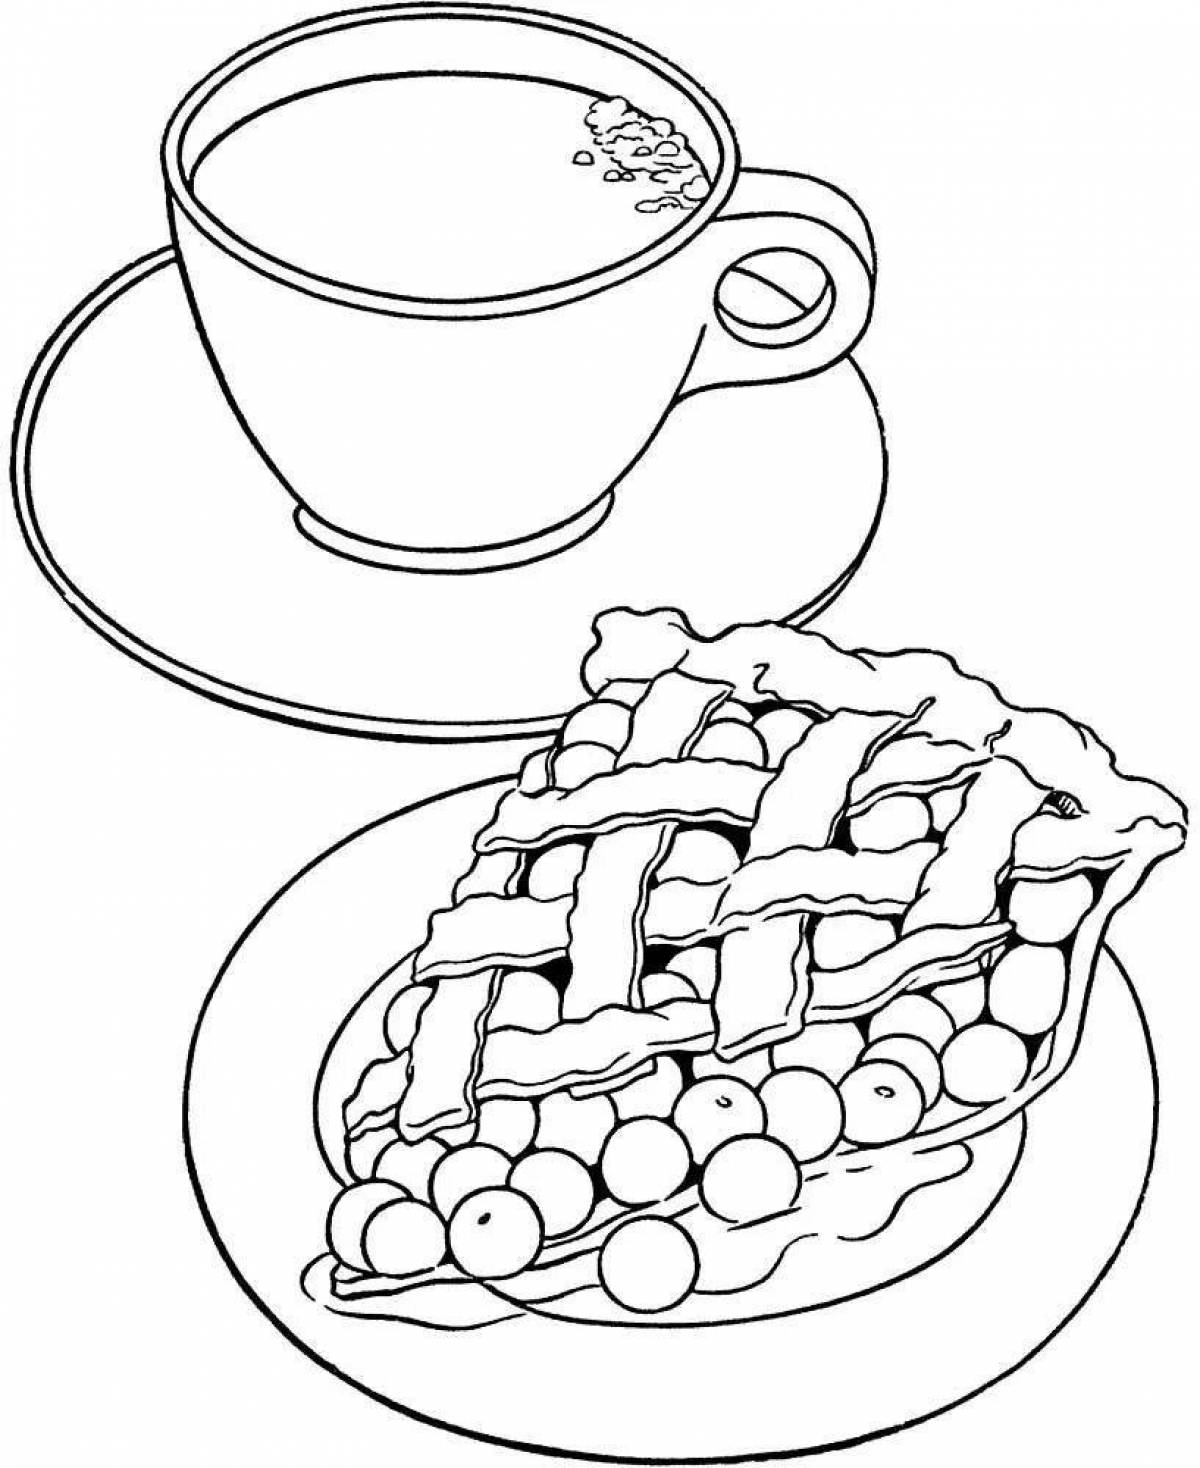 Incredible food coloring pages for kids